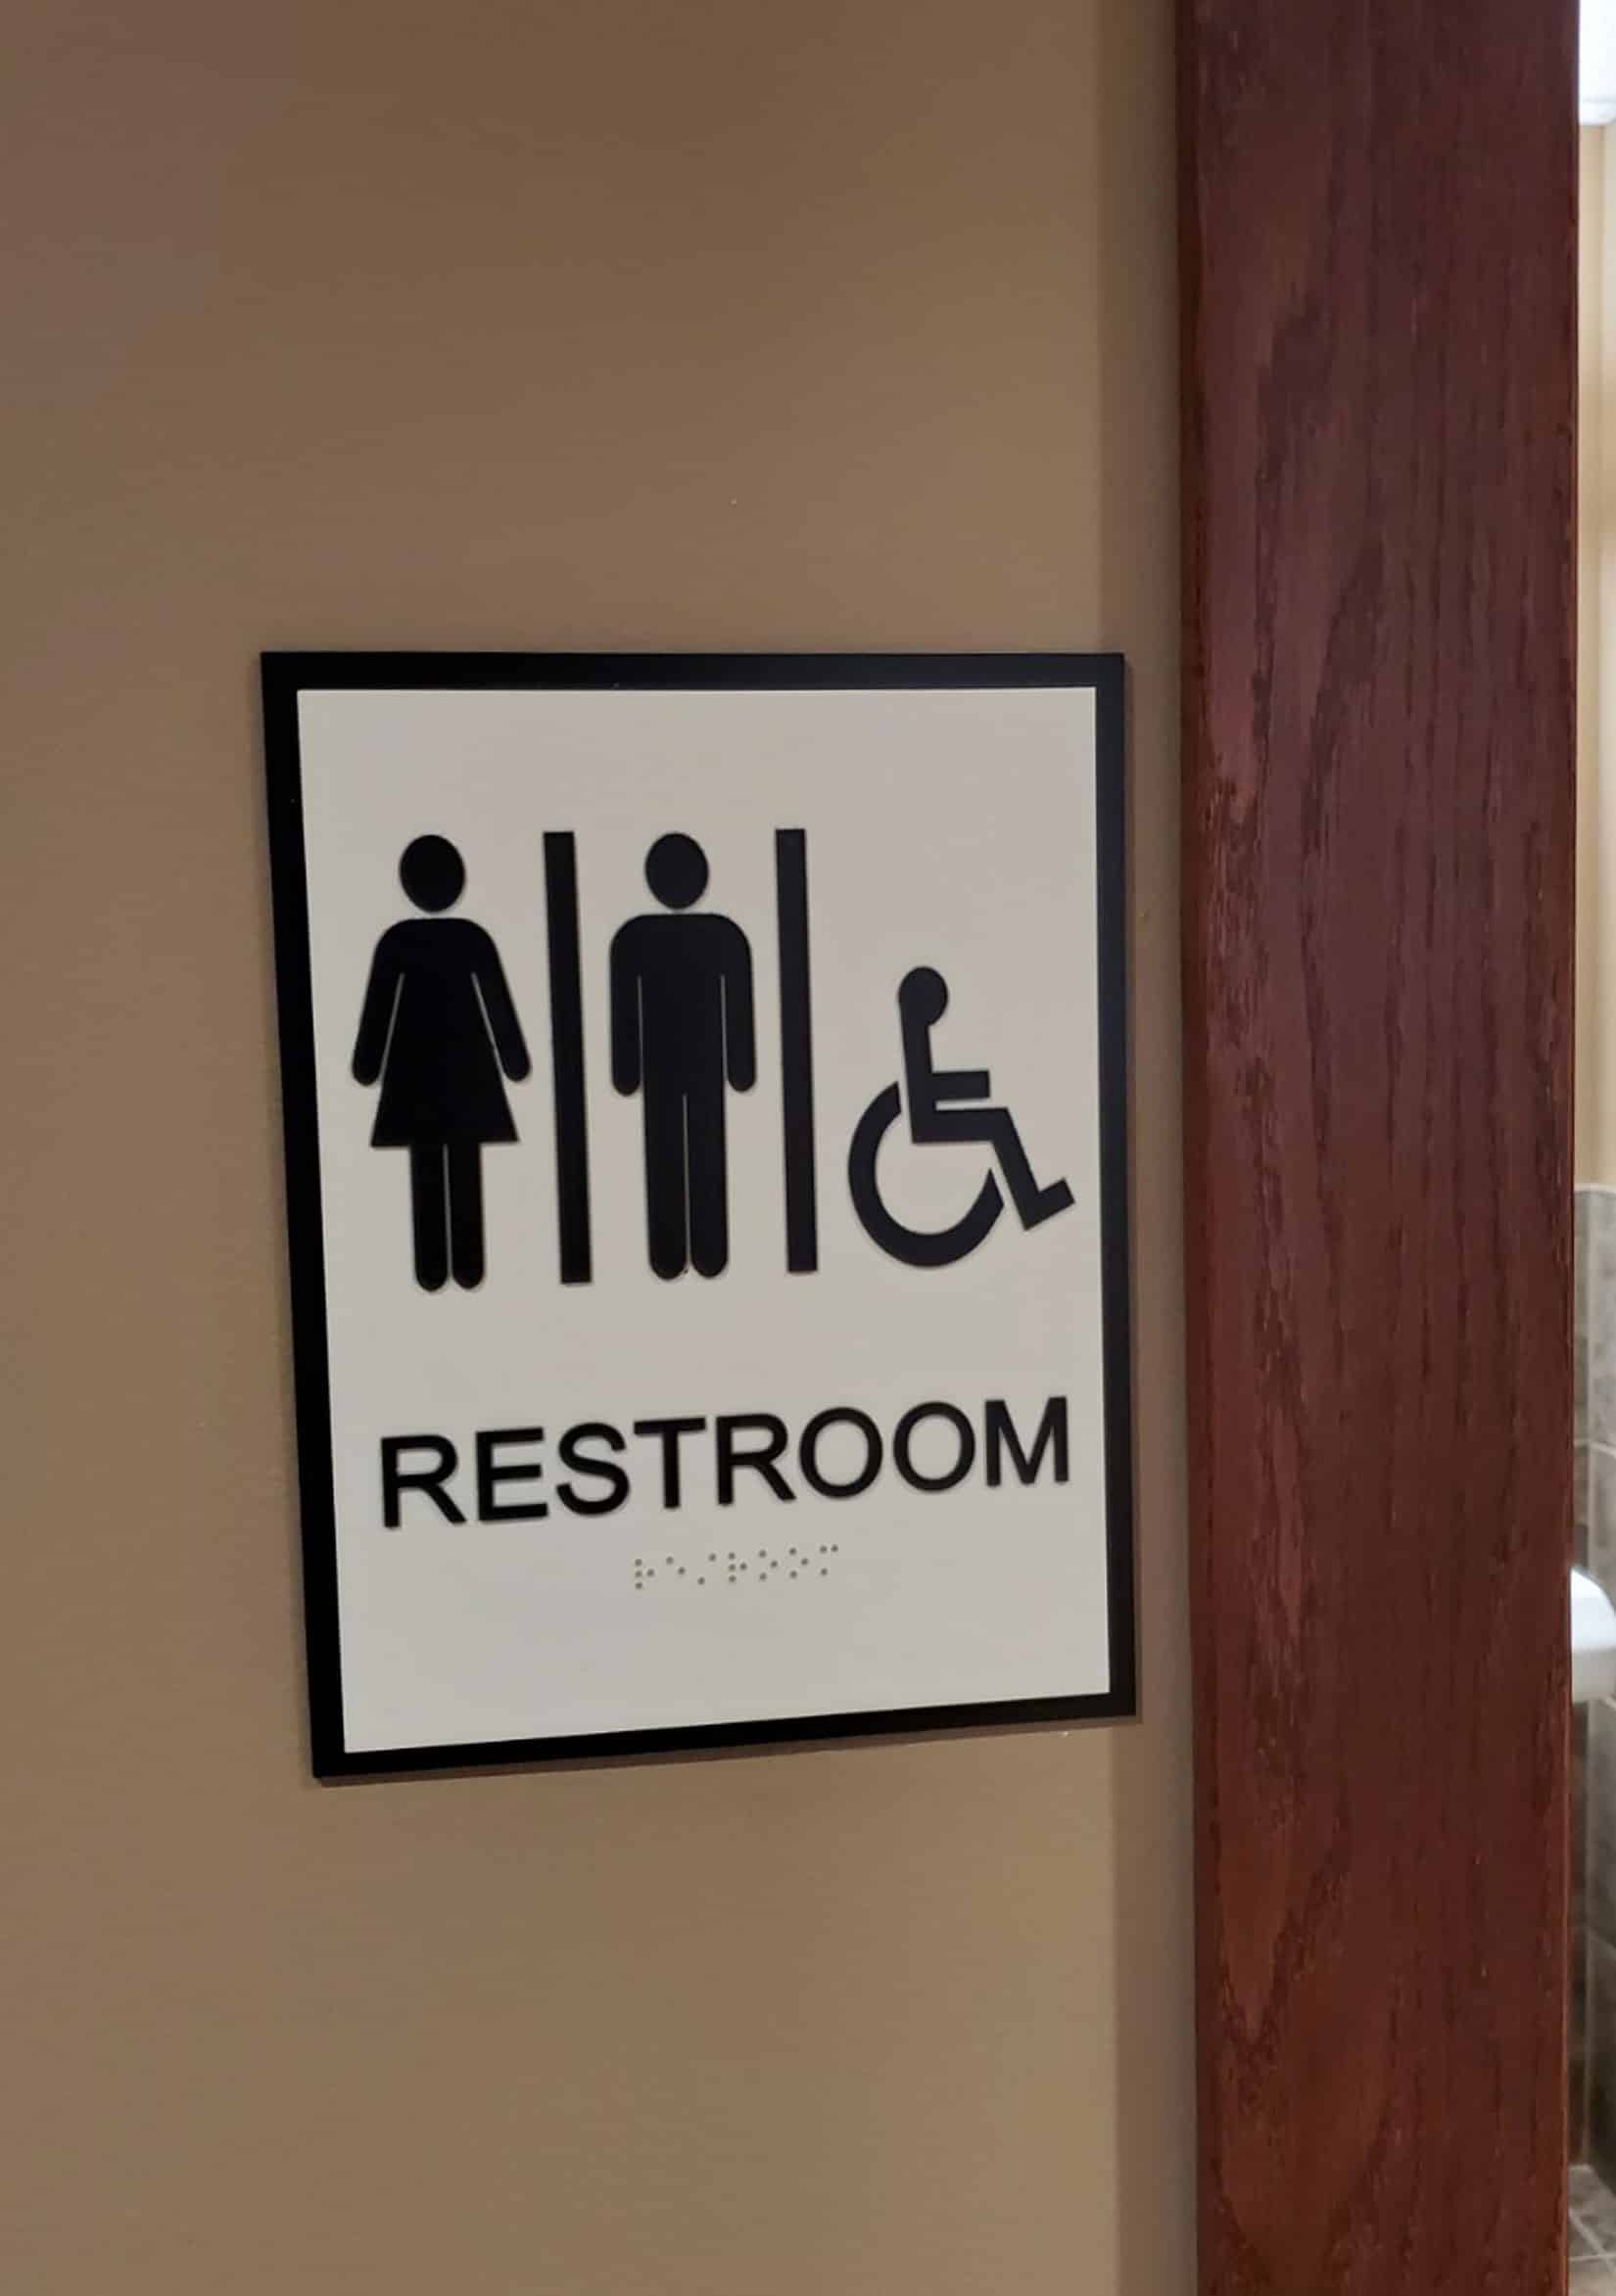 A standard restroom sign hanging inside an office on a tan wall